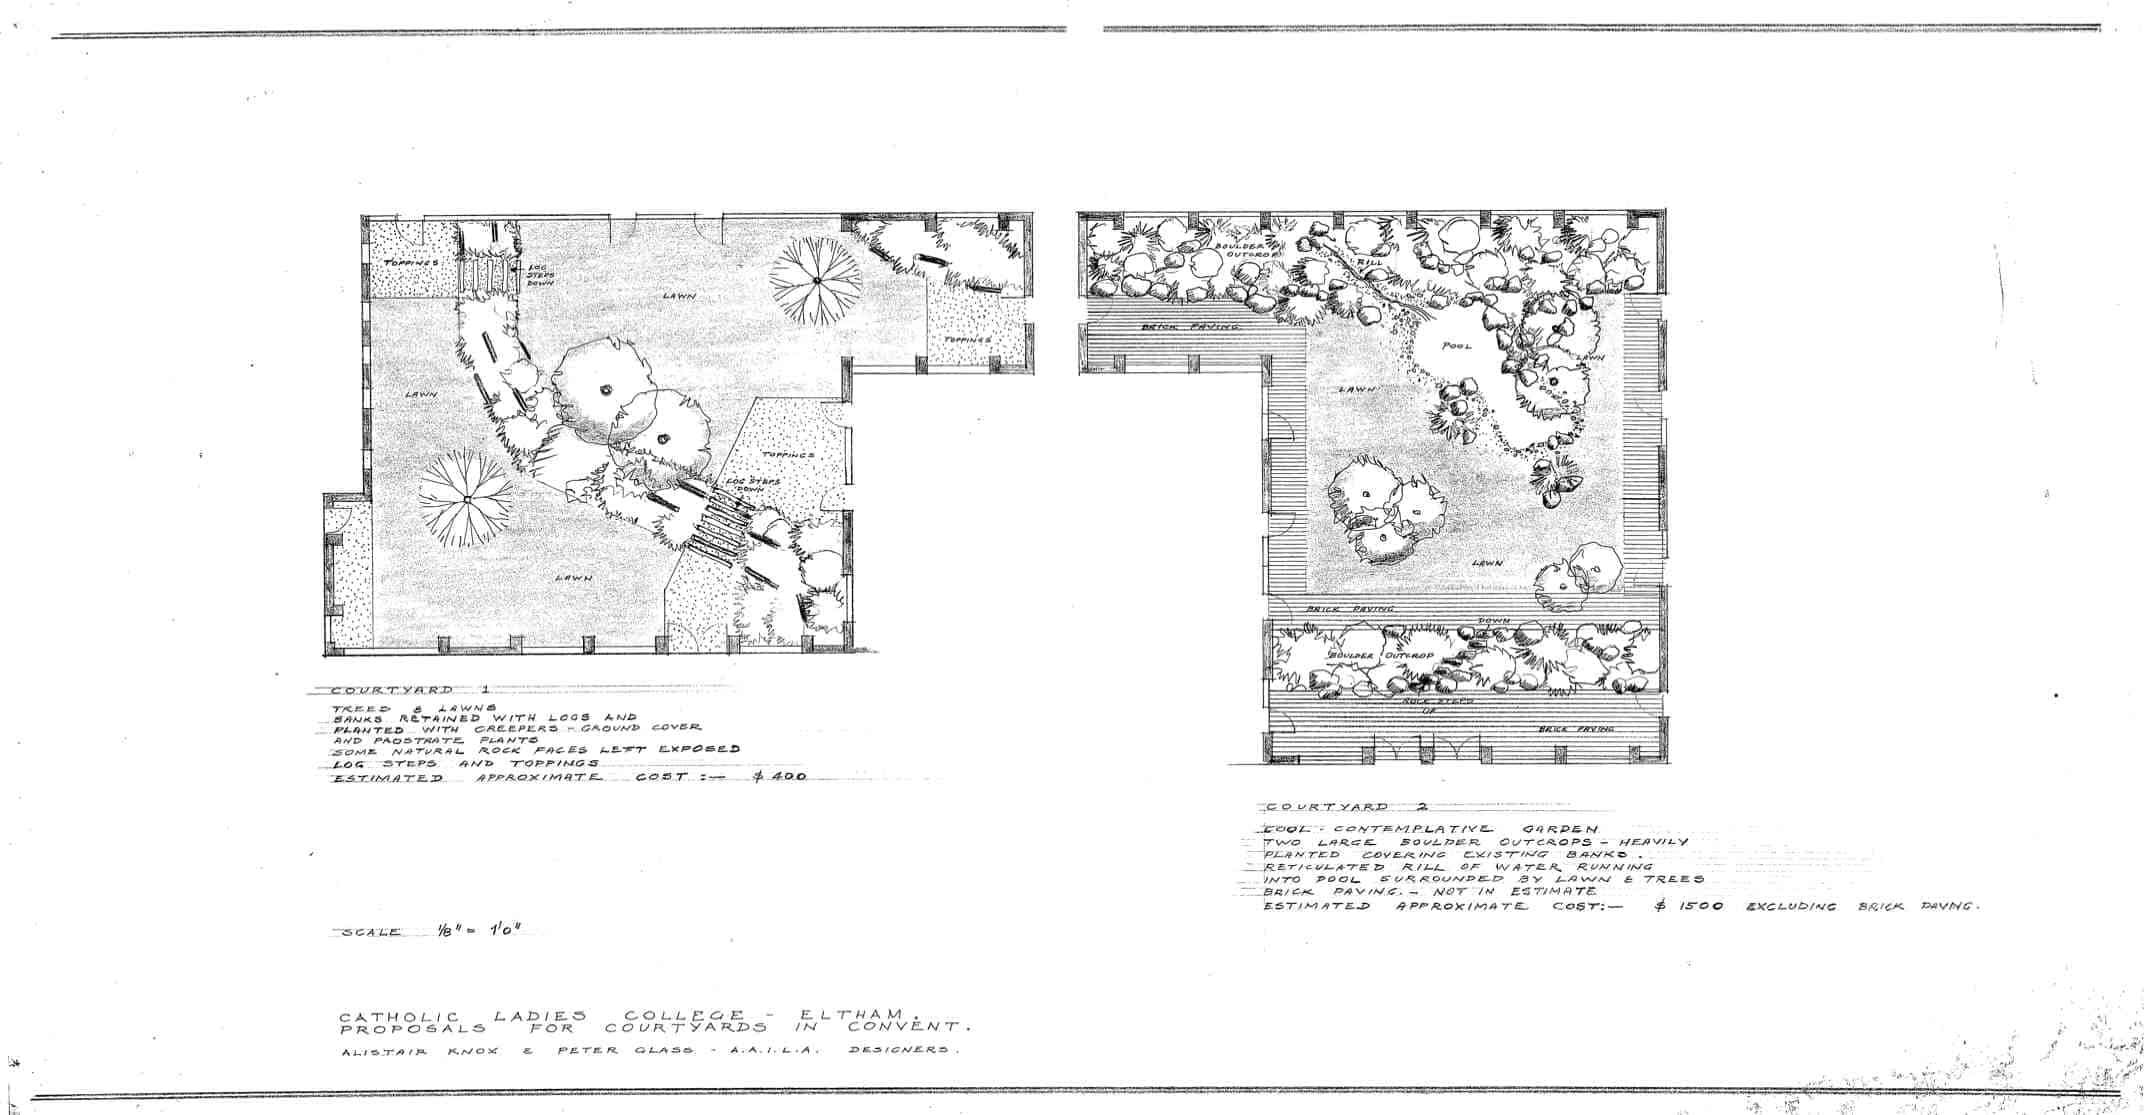 Dean, 4: Proposal for Courtyard in convent